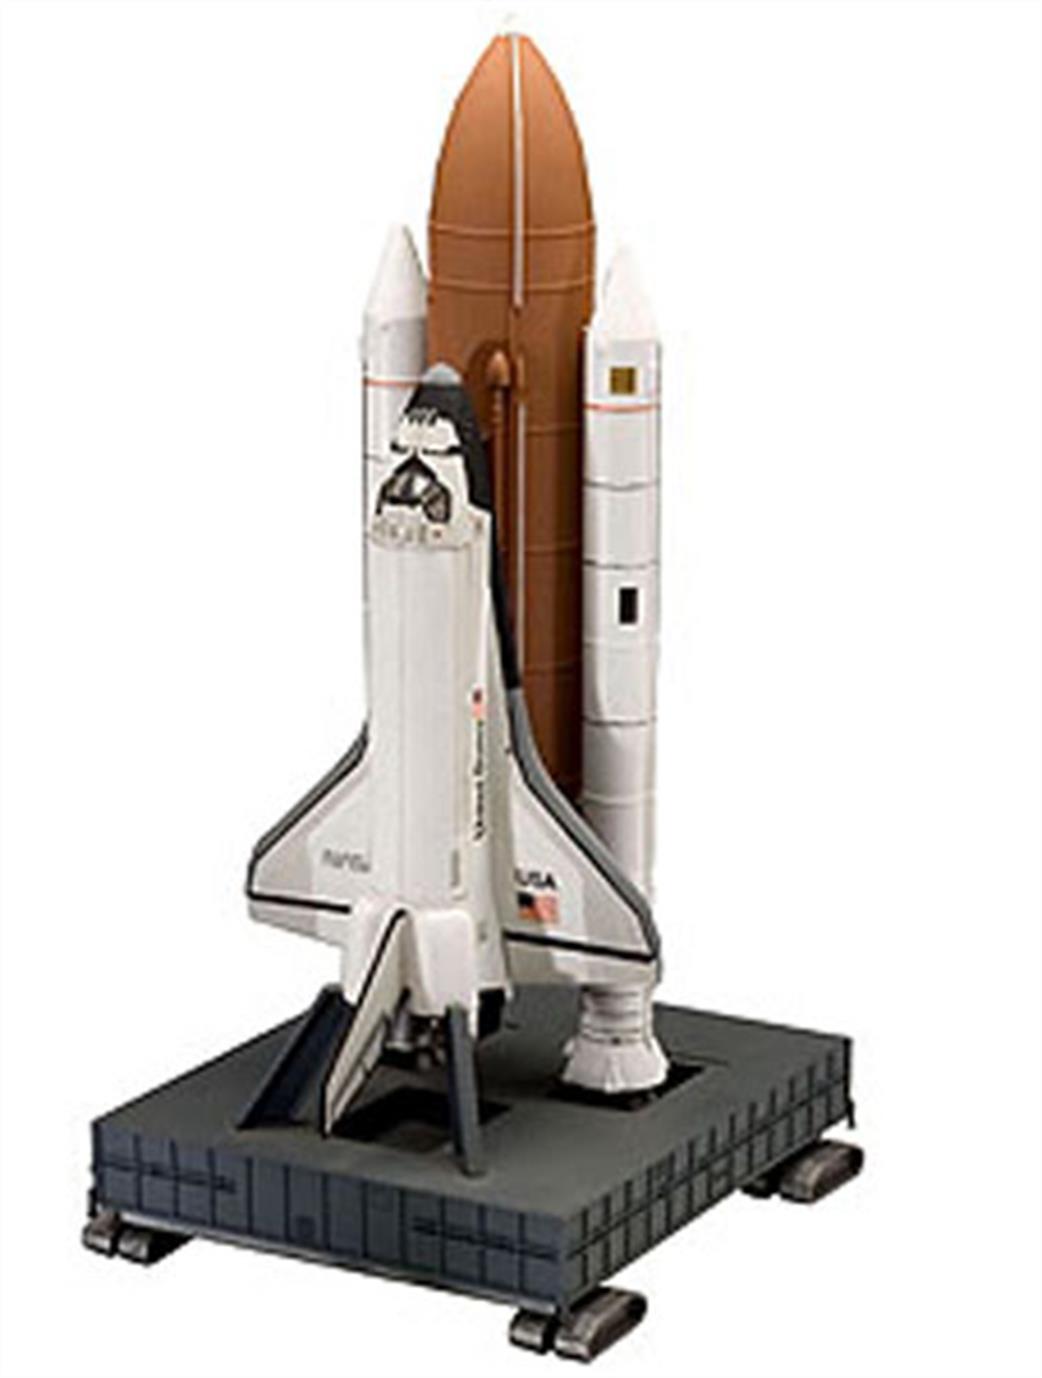 Revell 04736 Space Shuttle Discovery with Rocket Boosters Kit 1/144